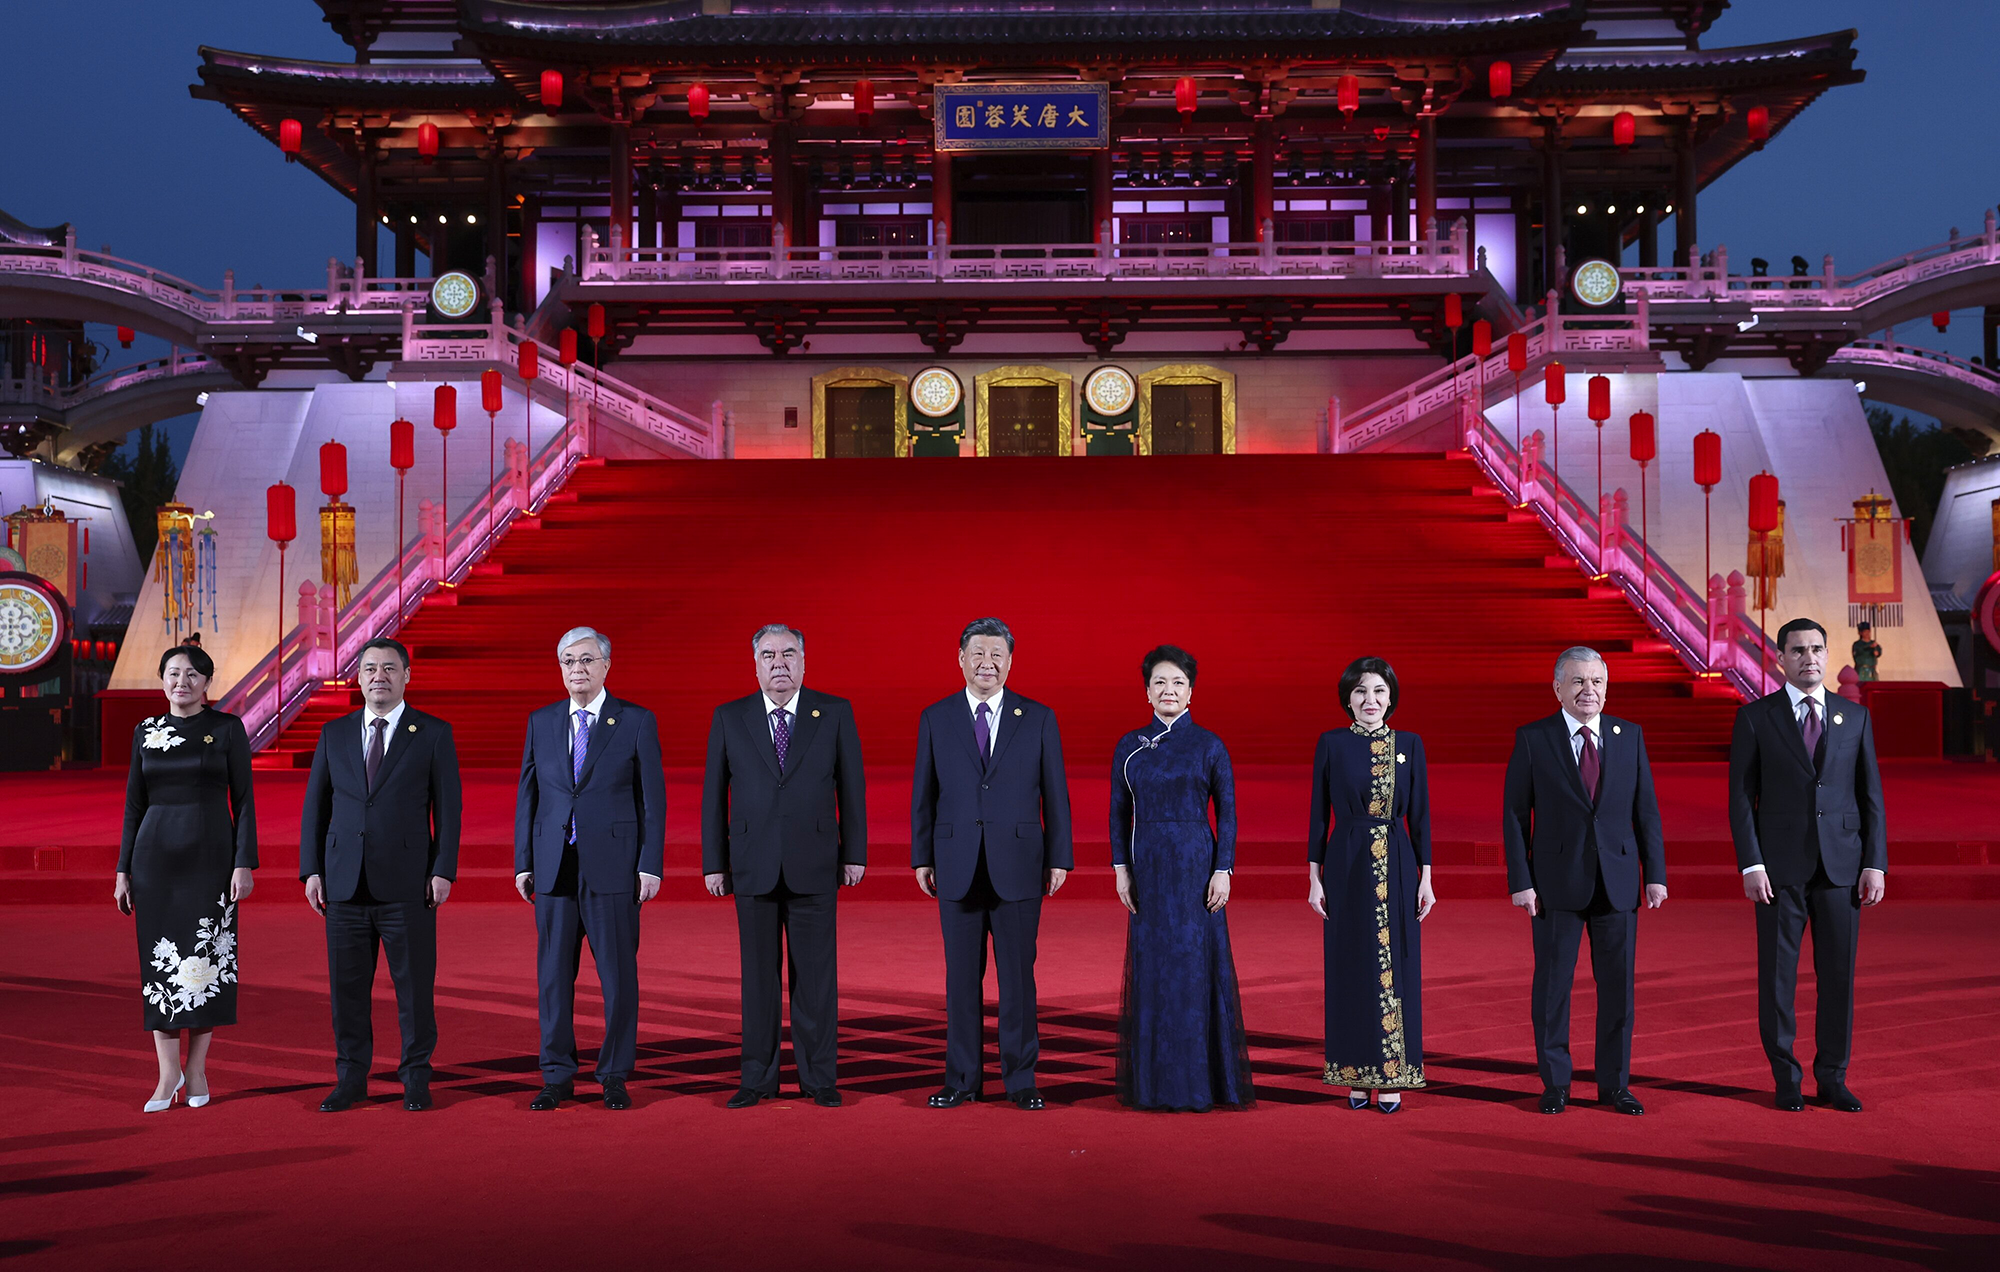 Chinese President Xi Jinping (center) and his wife Peng Liyuan (fourth from right) hold a welcome ceremony for Central Asian leaders and their wives in the city of Xi'an, northwest China's Shaanxi Province, on the evening of May 18, 2023. Photo: Xinhua